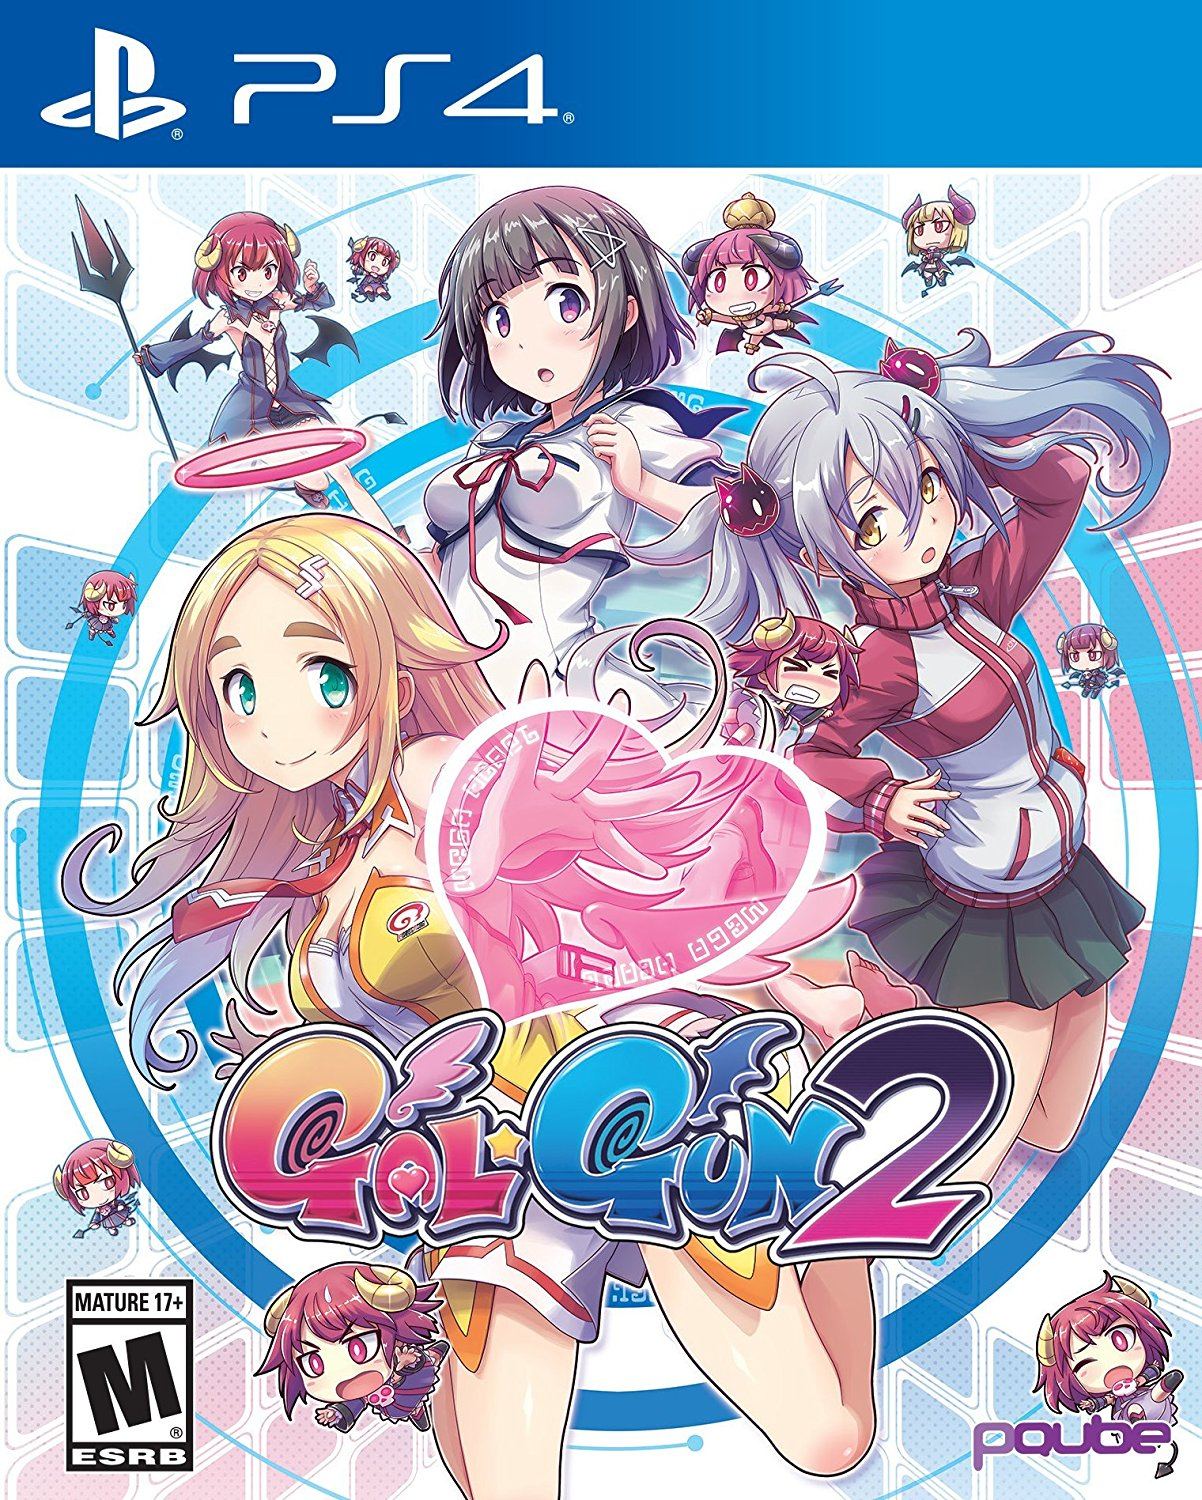 Judge a game by its cover - Page 5 Galgun-2-538469.10